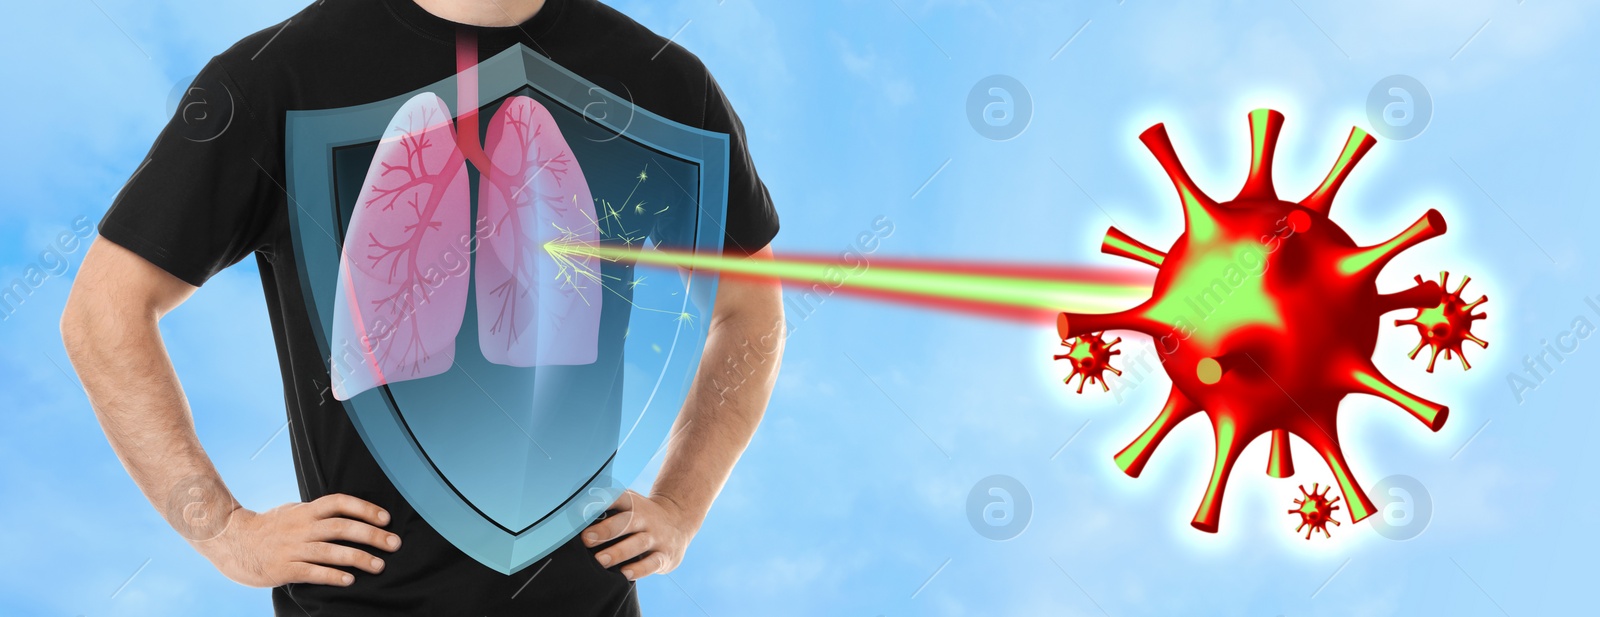 Image of Virus affecting man. Human lungs protected by strong immune system shield